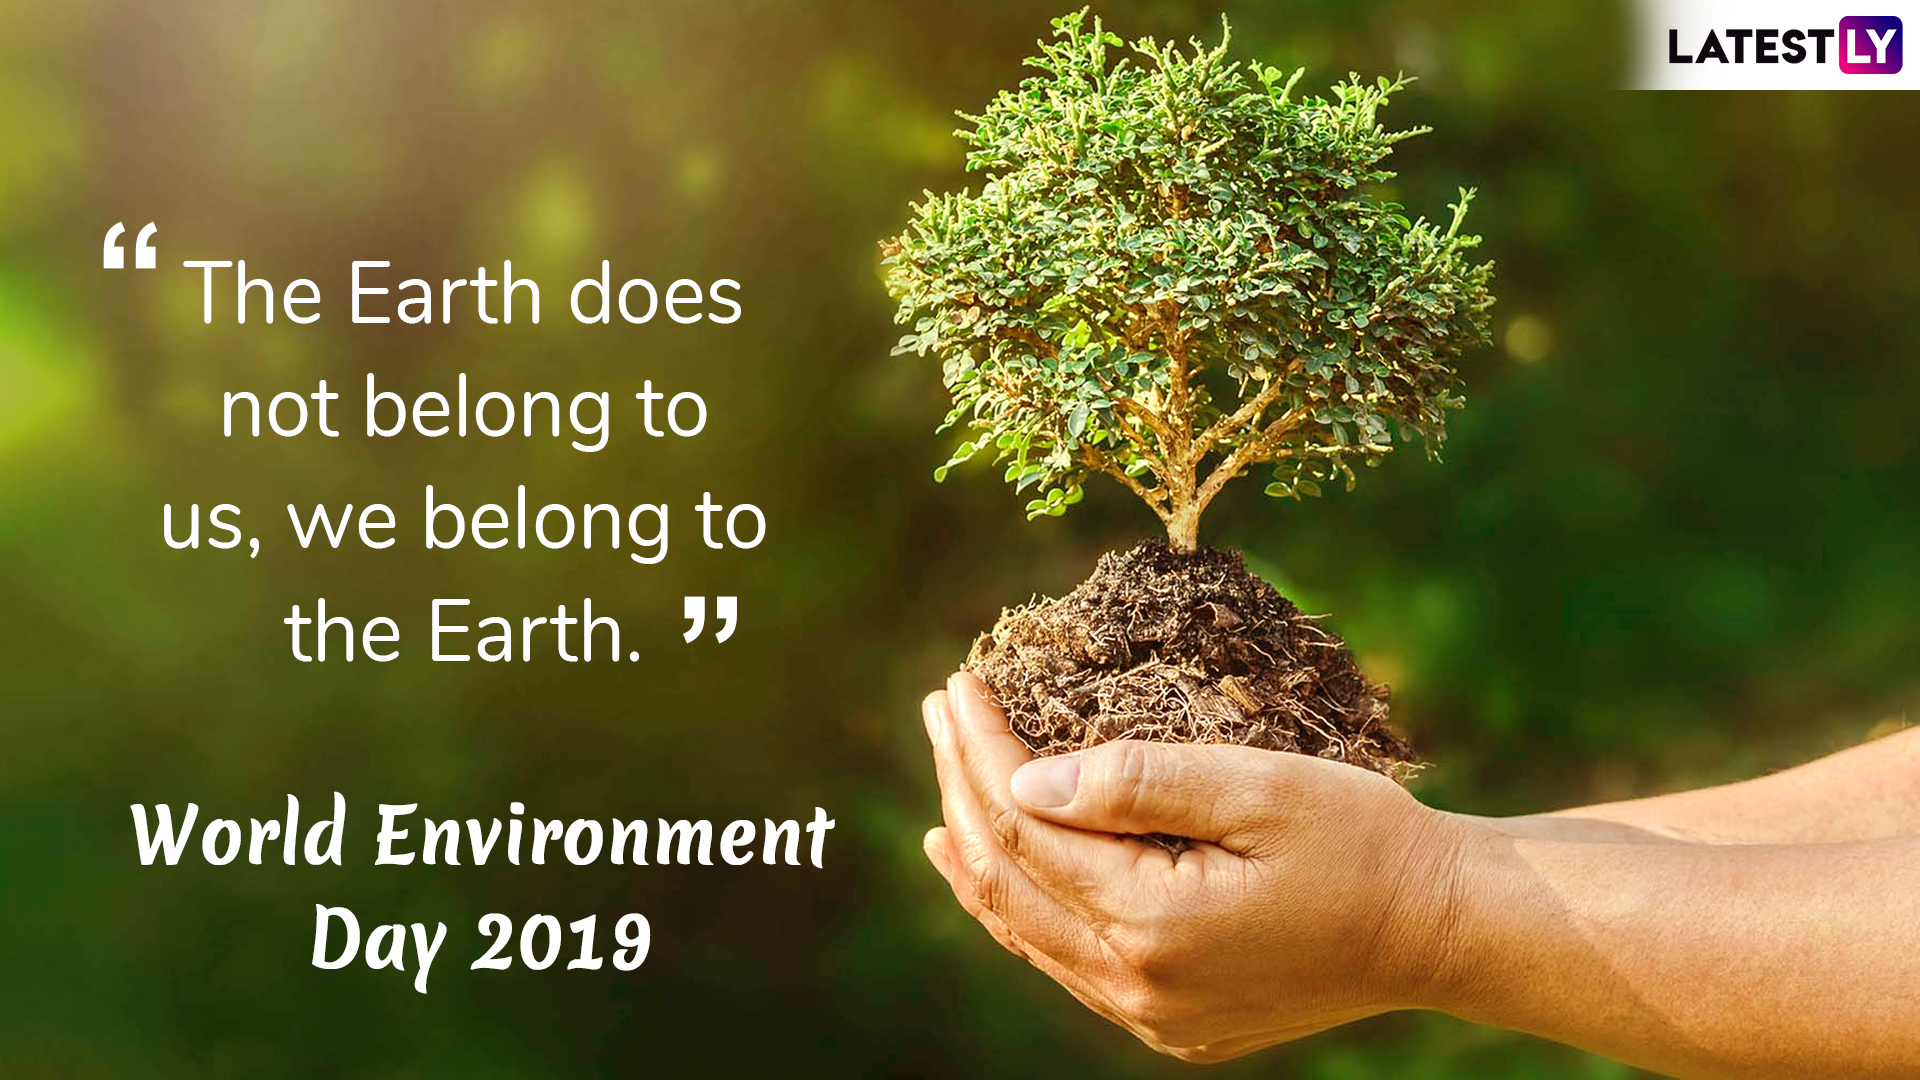 world environment day 2019 message and image 1